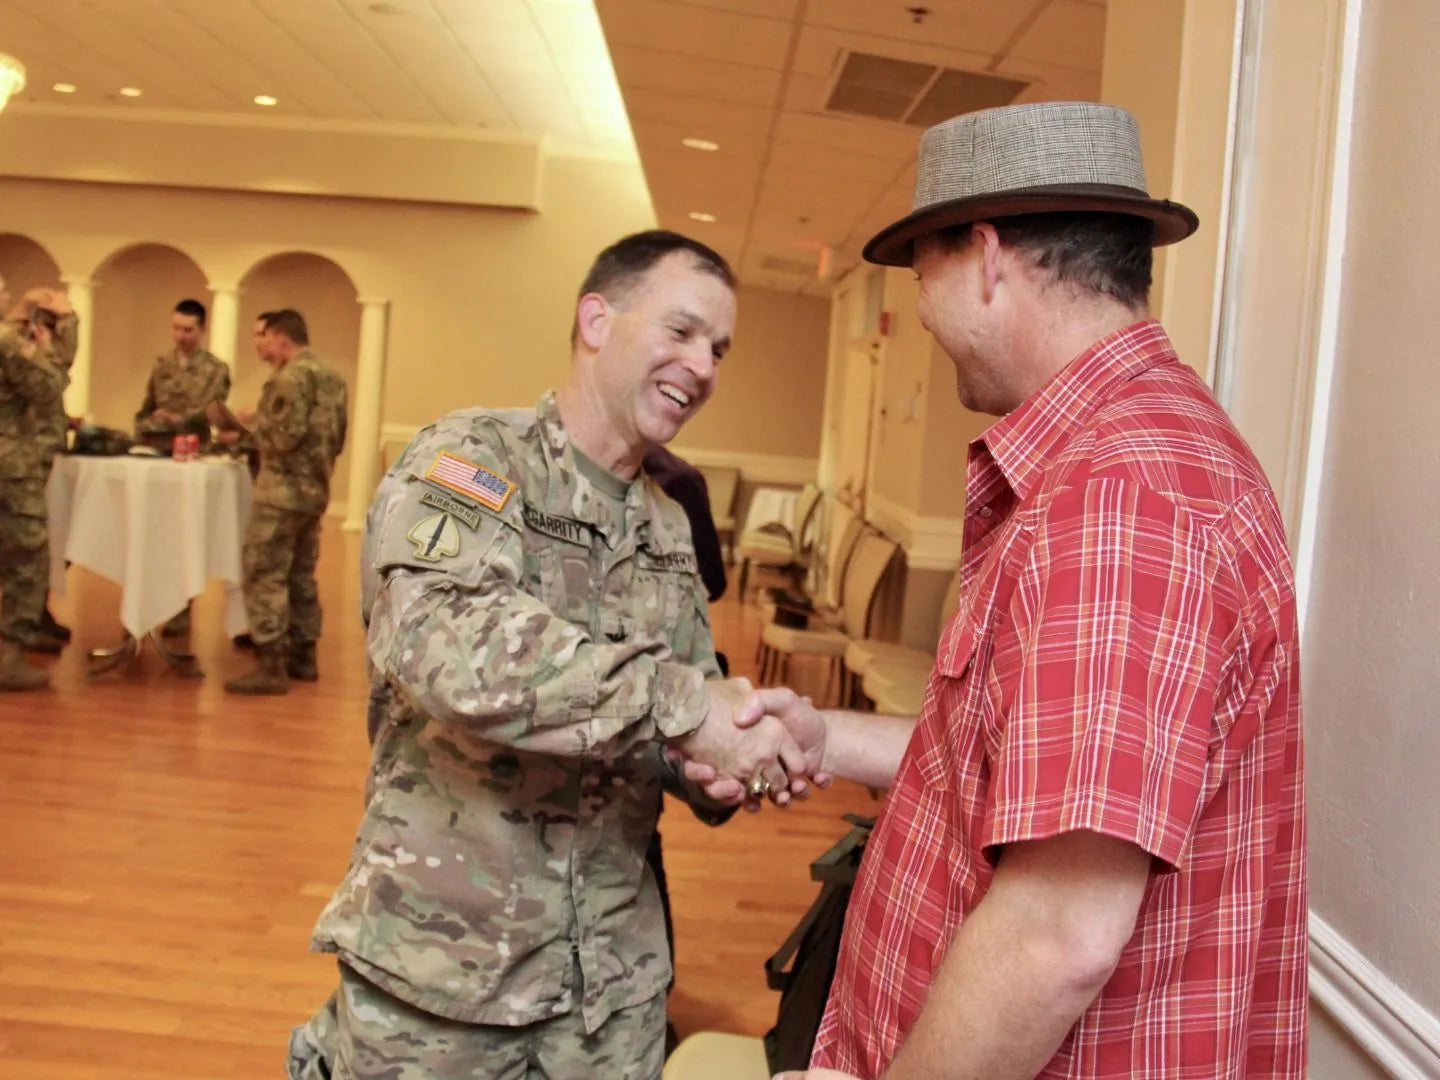 An American soldier shaking hands with a man wearing a brown fedora